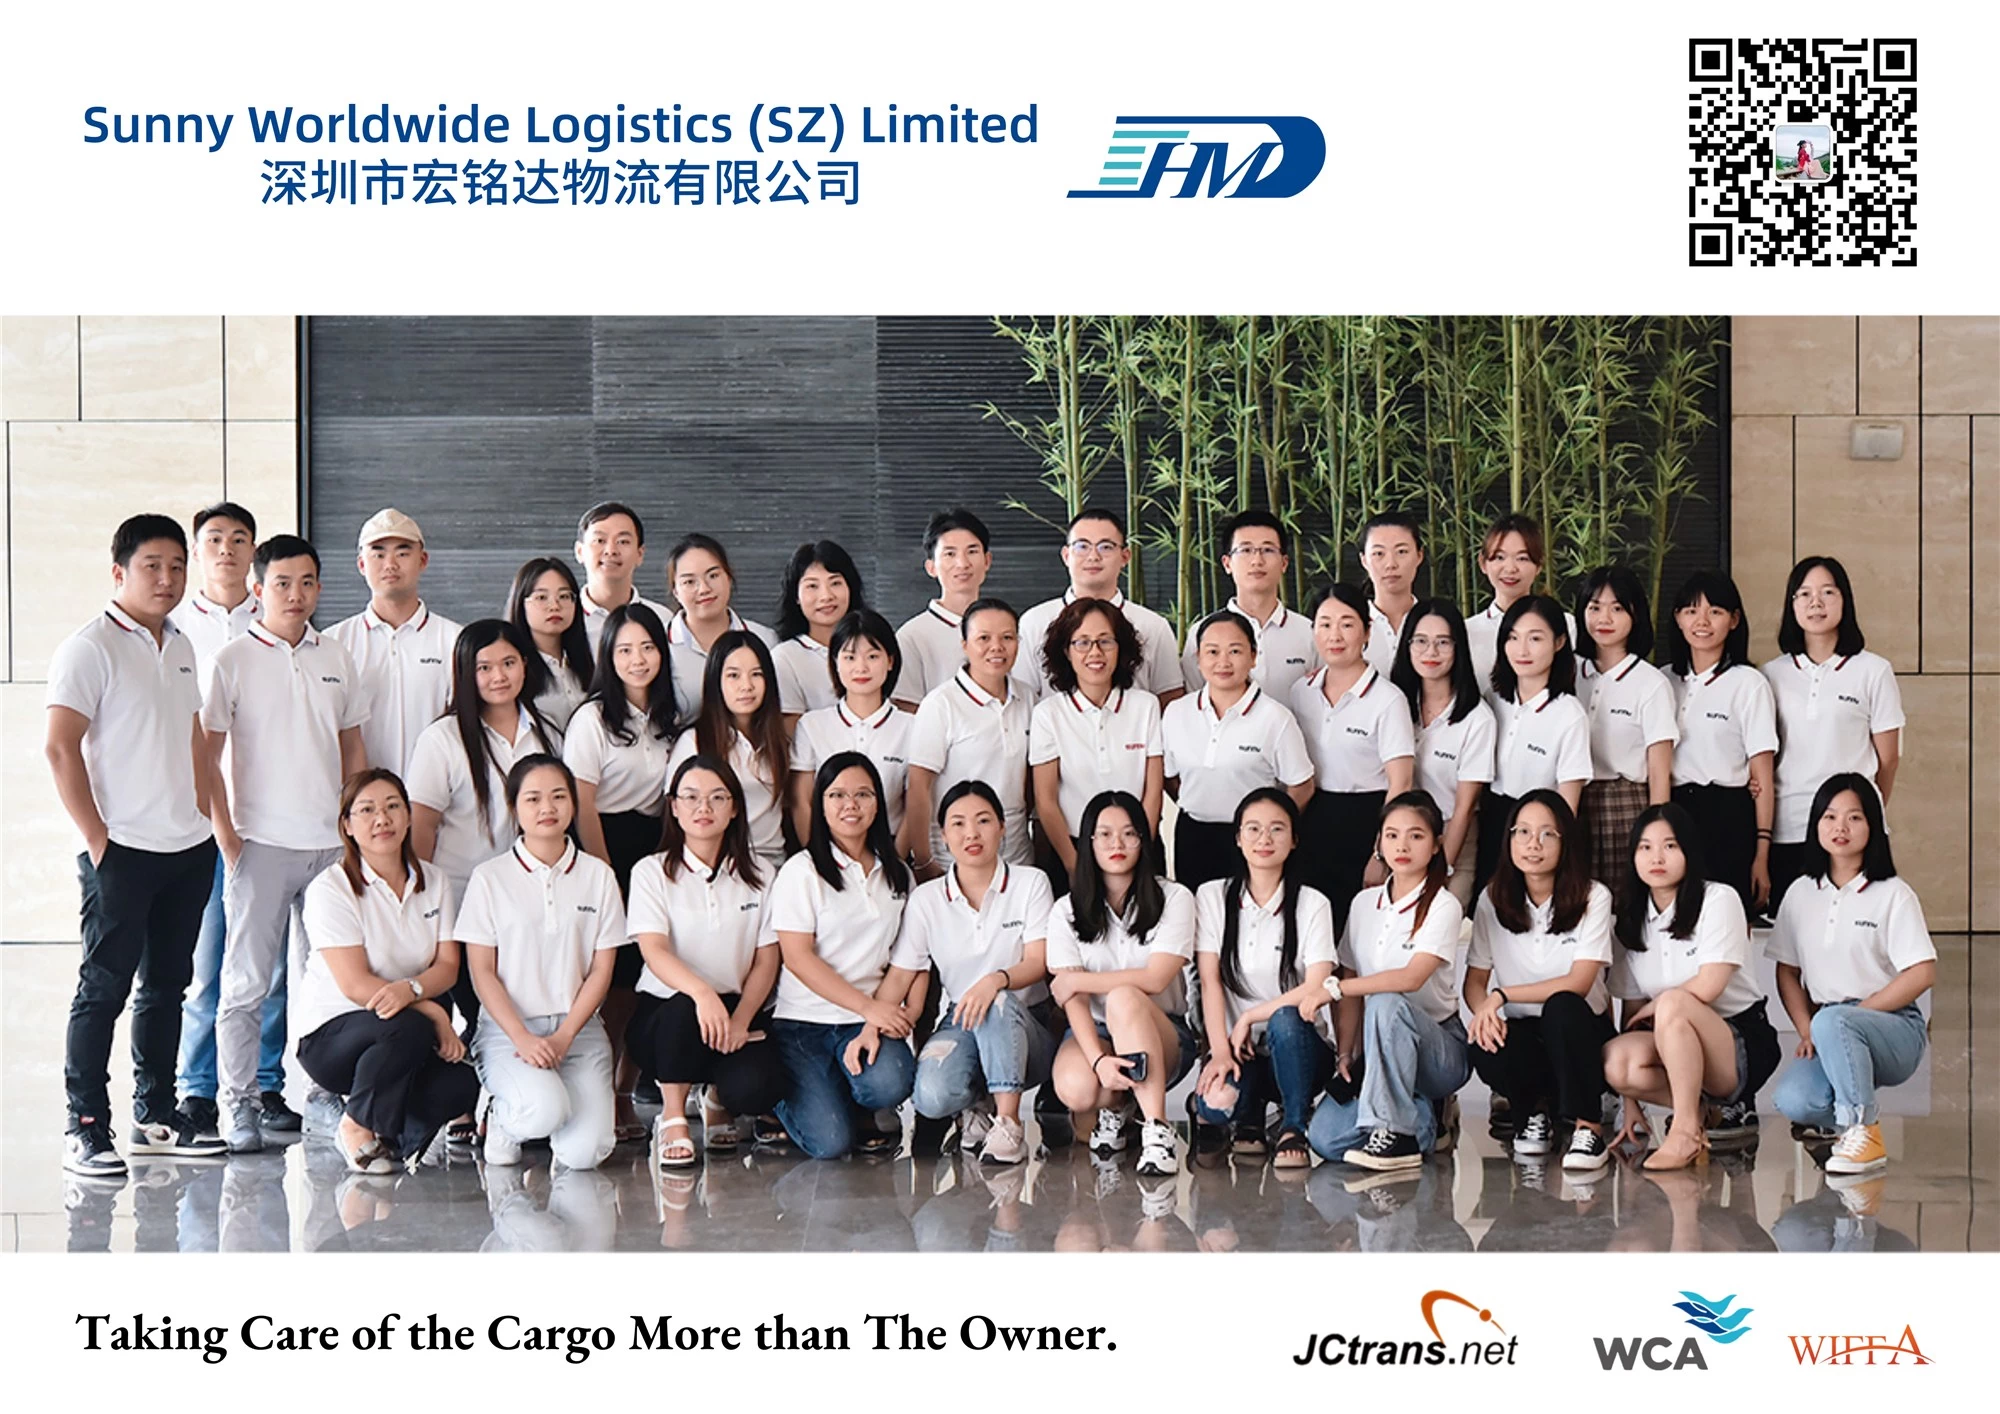 Door to door service from China to Singapore including customs clearance 